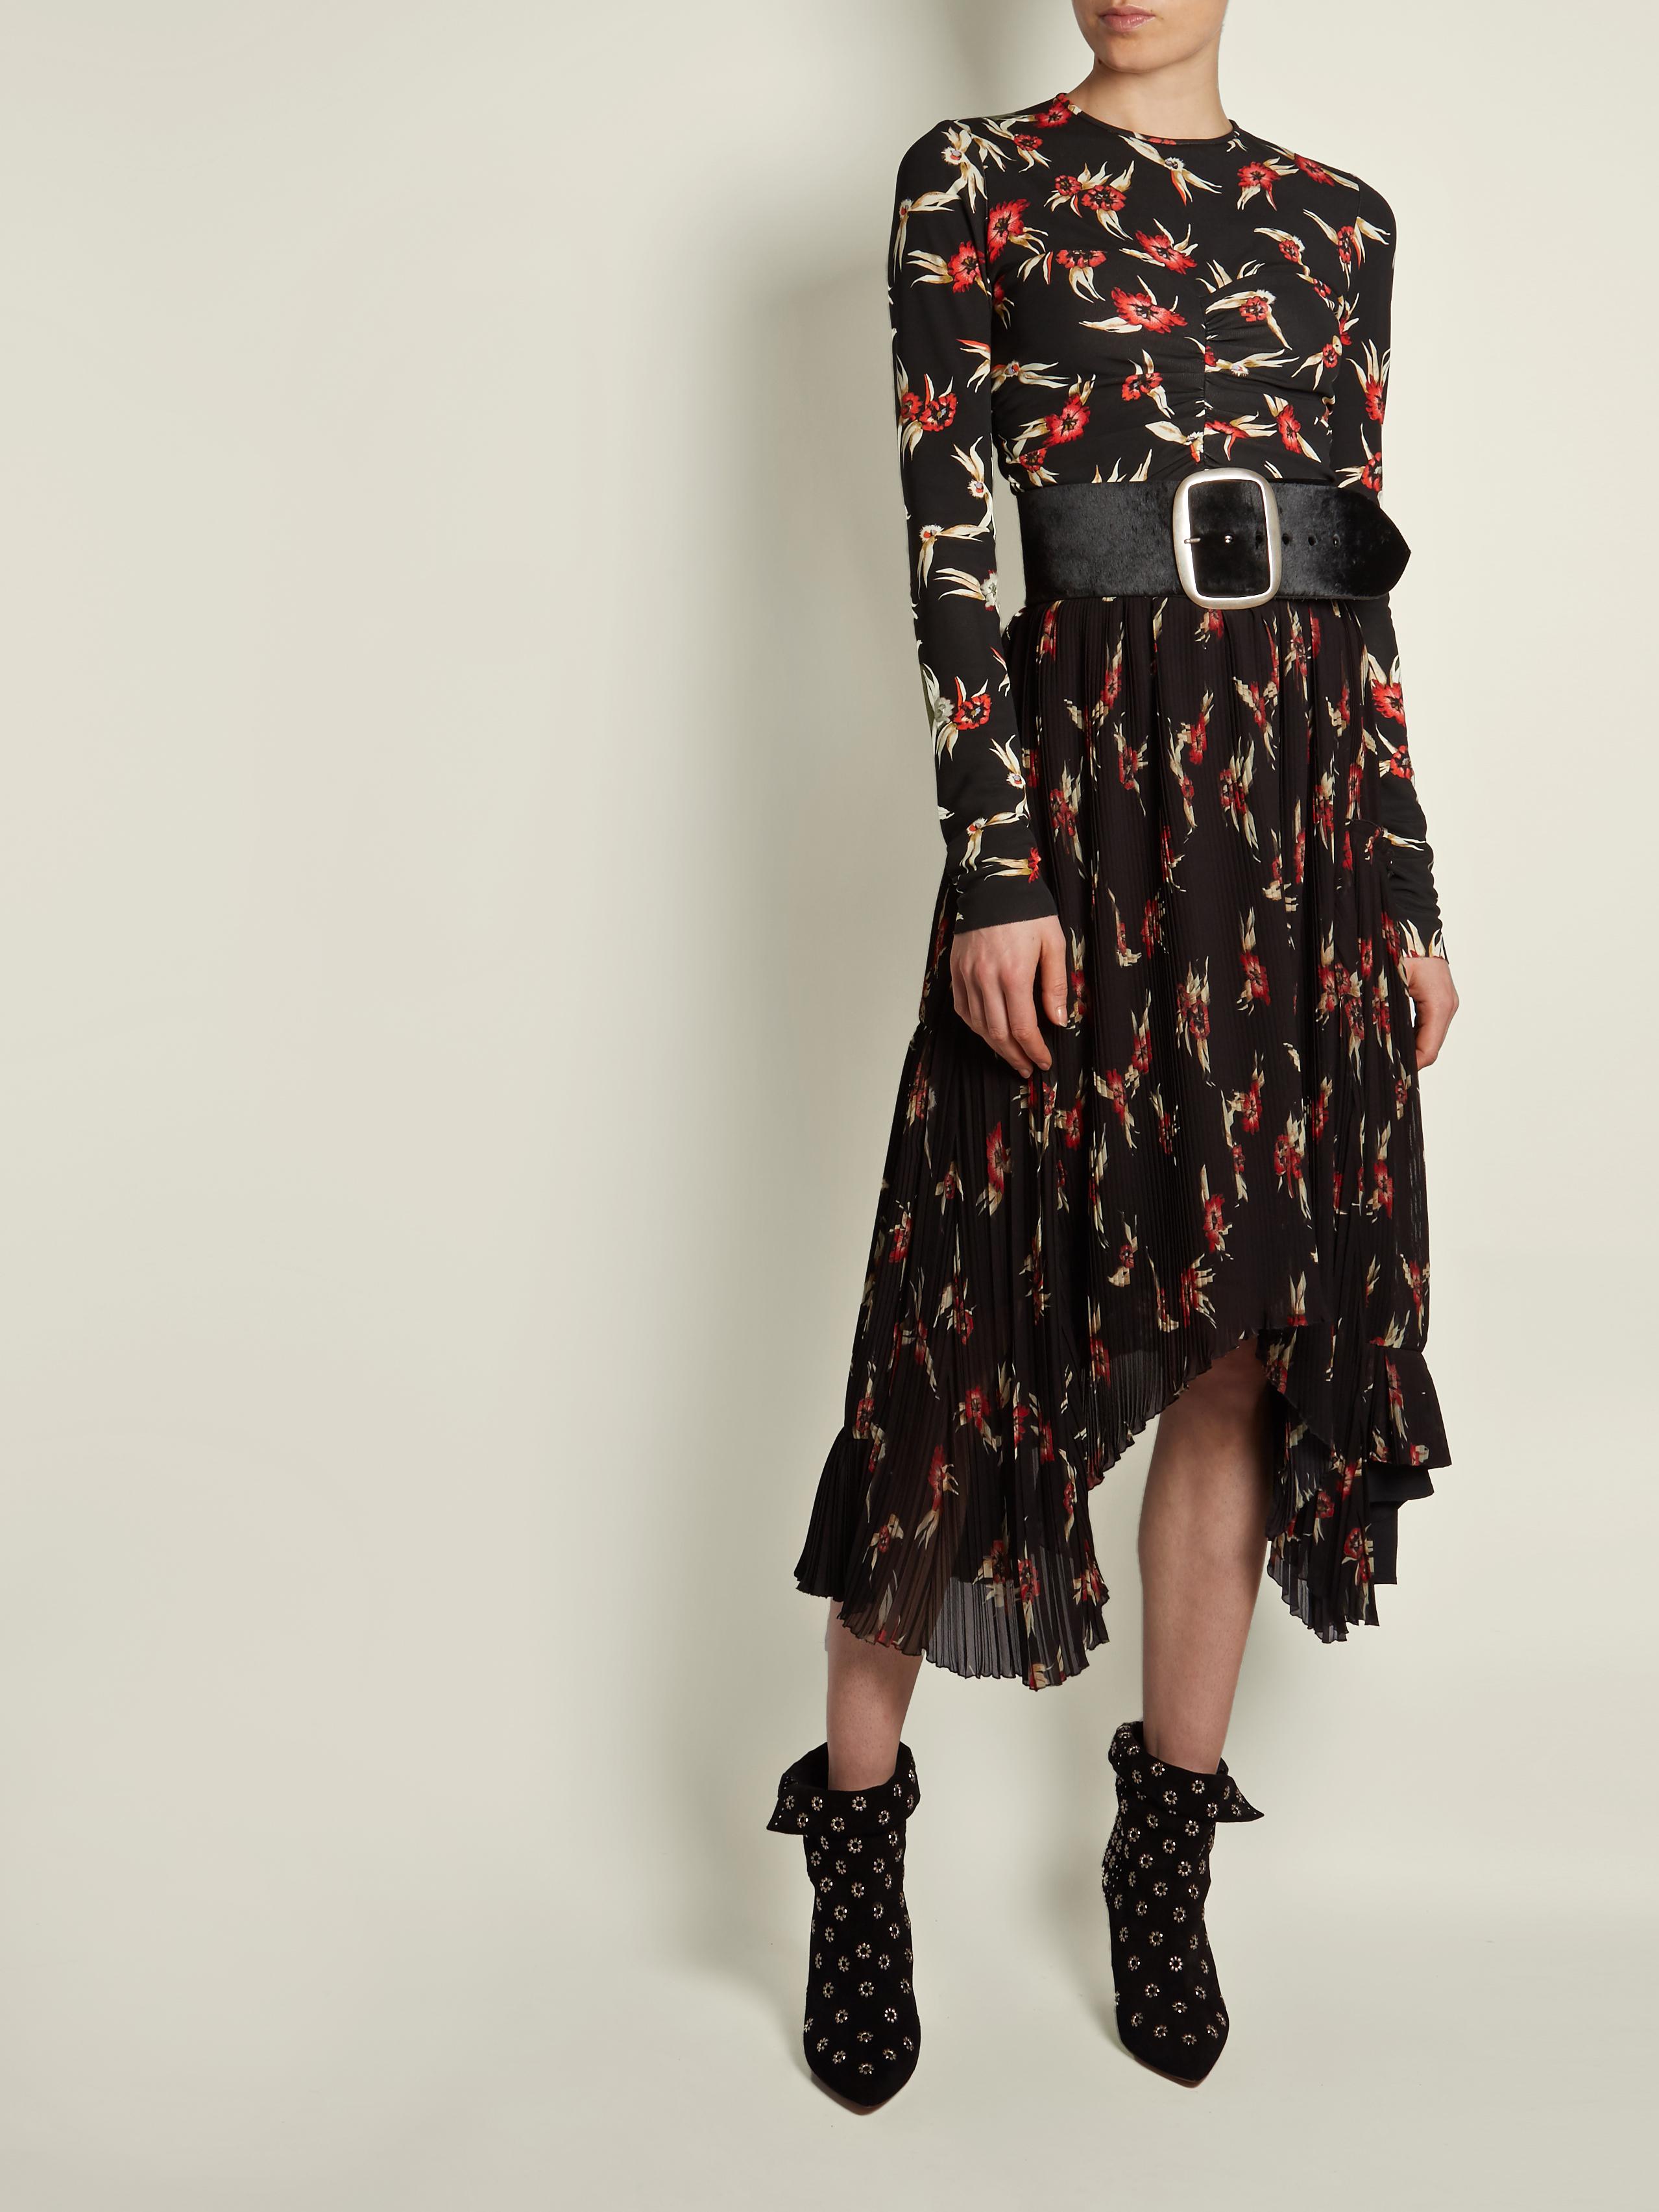 Isabel Marant Synthetic Wilny Pleated Skirt in Black Red (Black) - Lyst